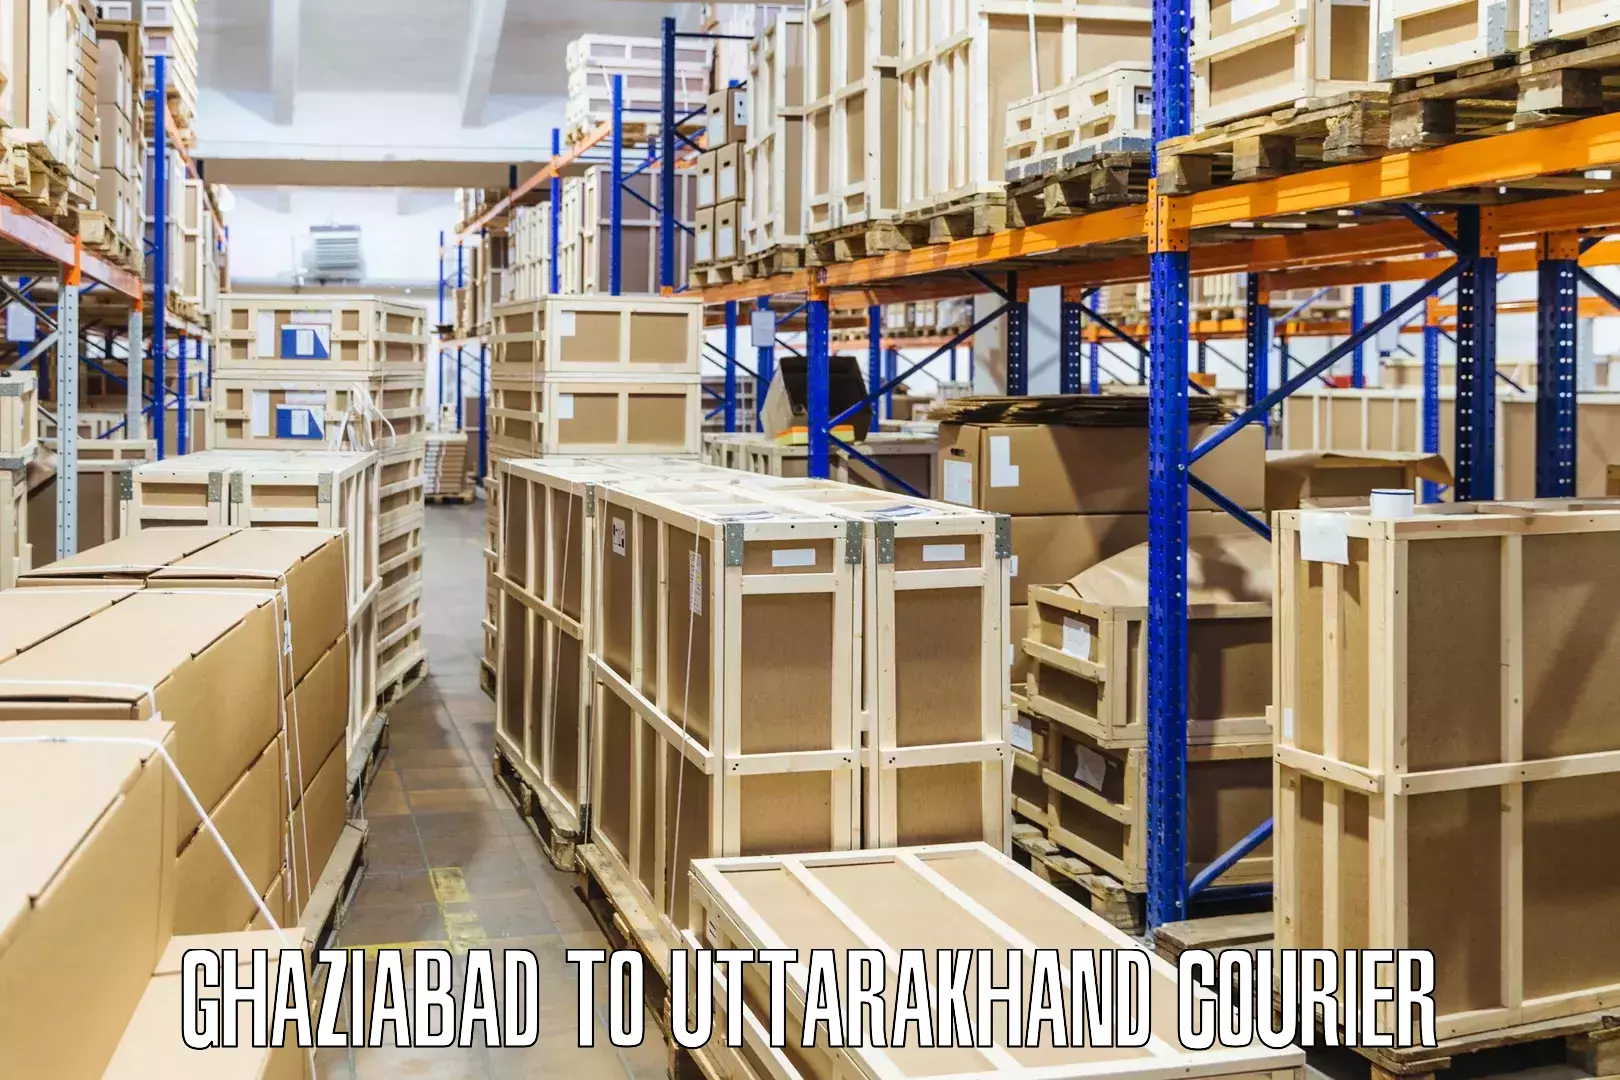 Reliable courier service Ghaziabad to Uttarakhand